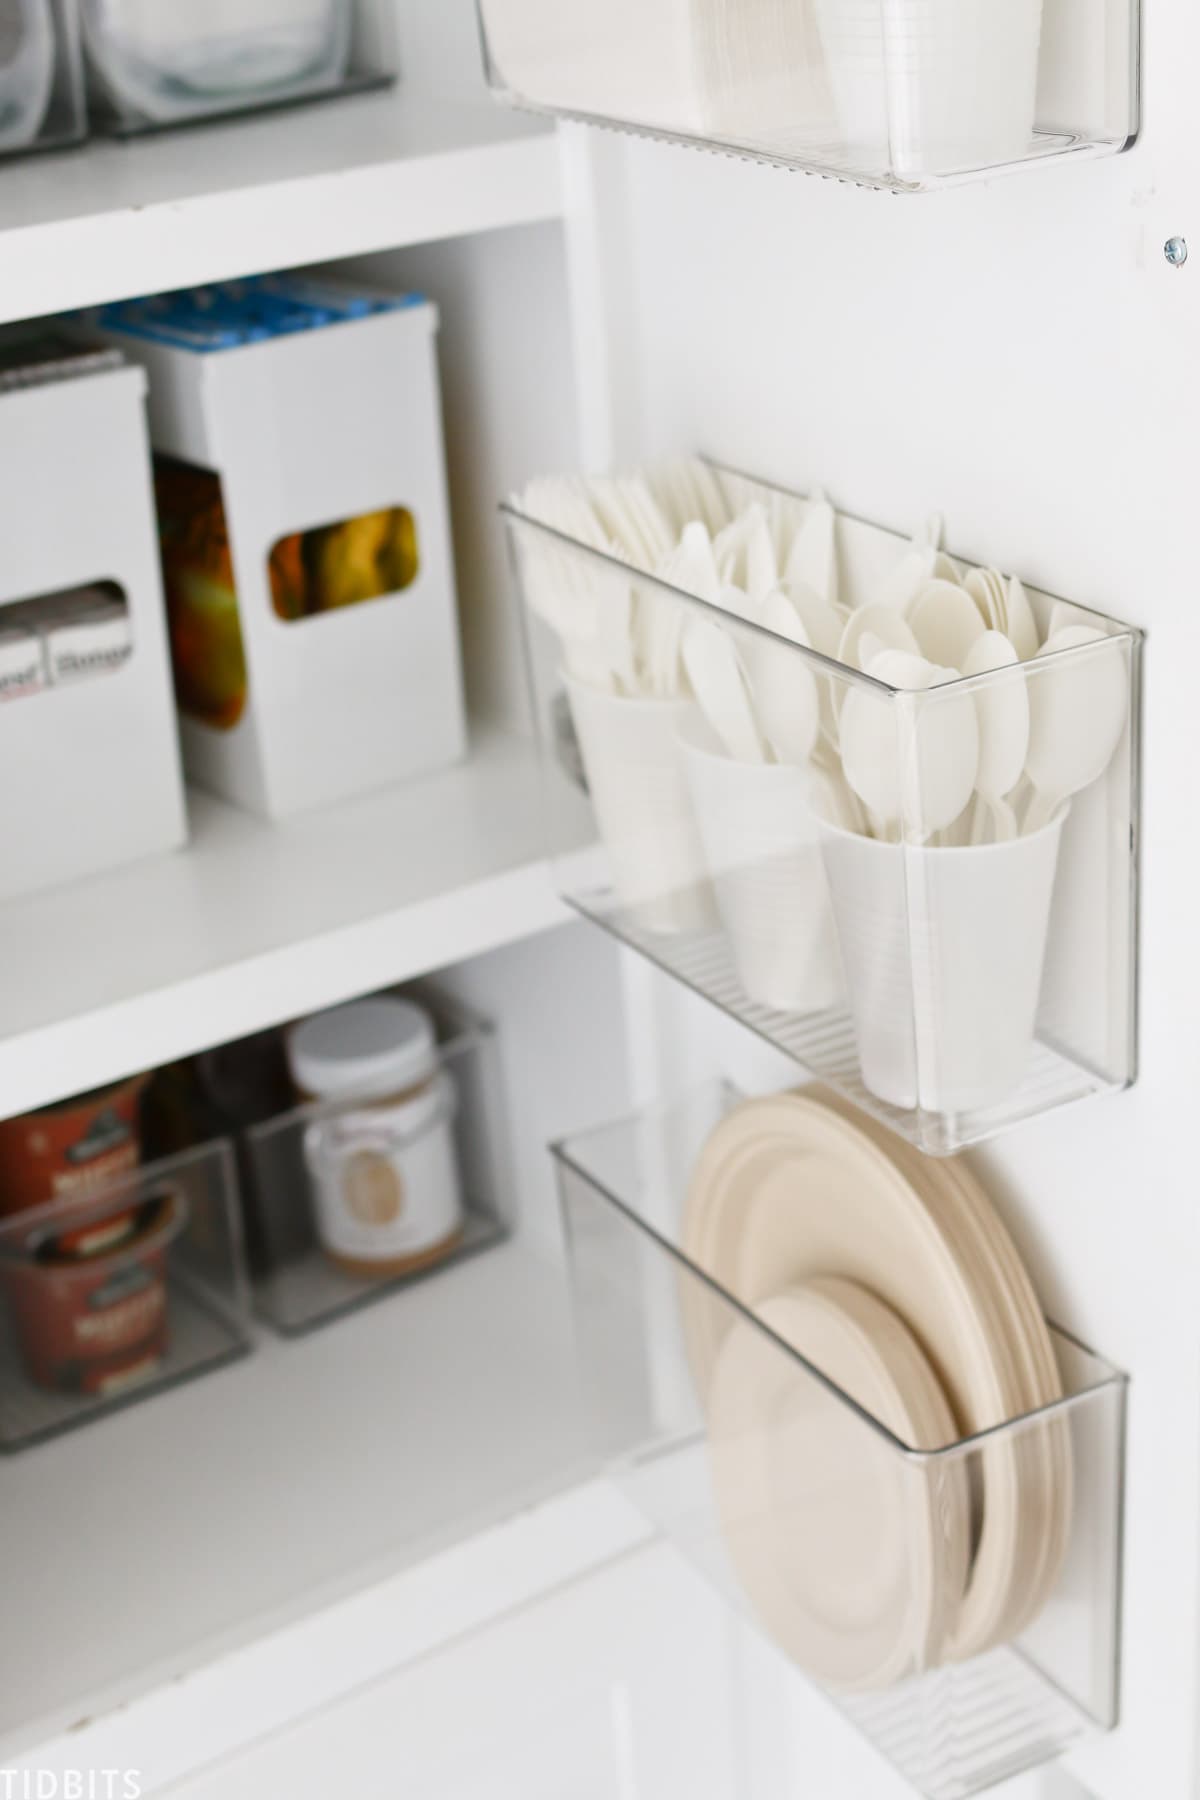 Storing paper products on the cabinet door fronts